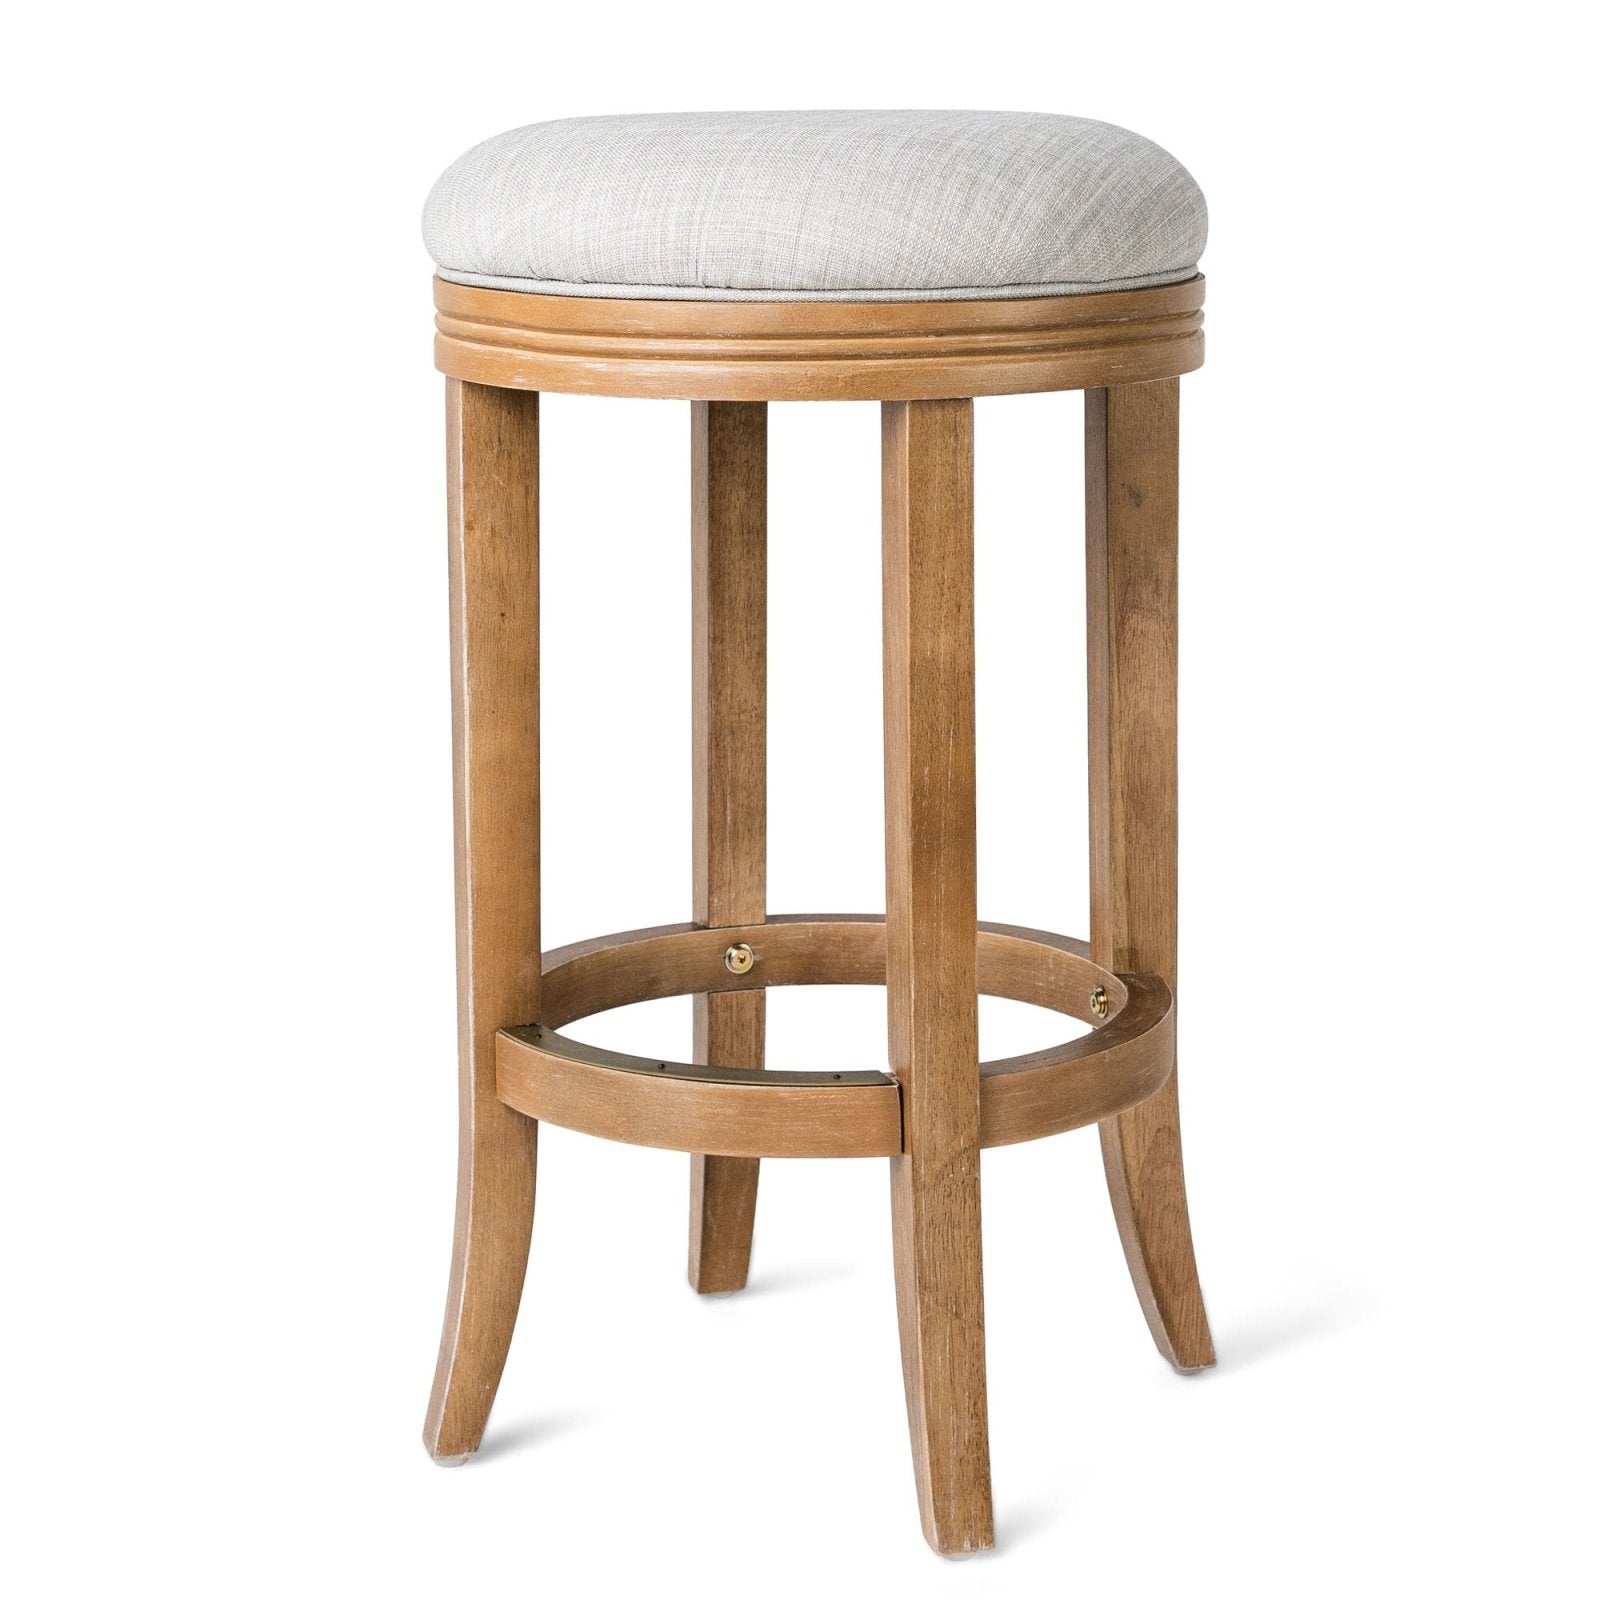 Eva Counter Stool in Weathered Oak Finish with Sand Color Fabric Upholstery in Stools by Maven Lane